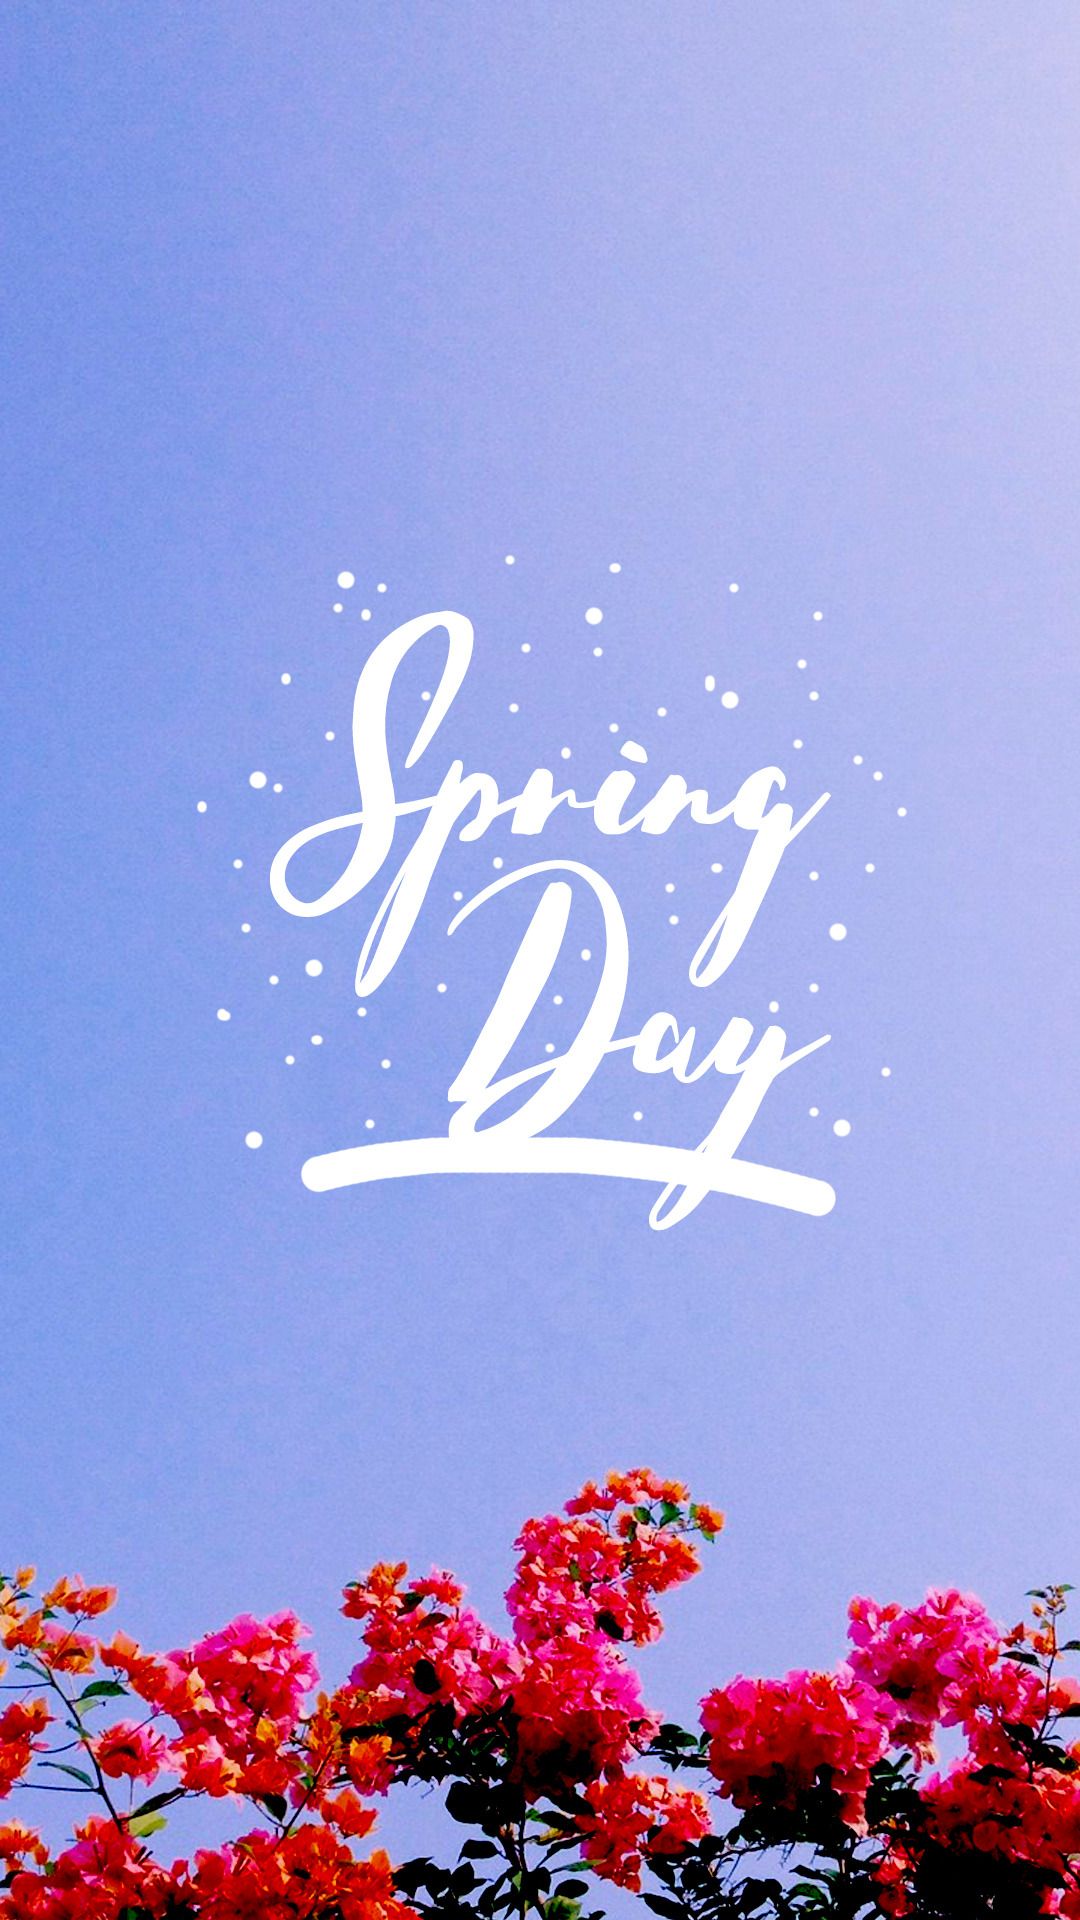 Aesthetic BTS Spring Day Wallpapers - Wallpaper Cave